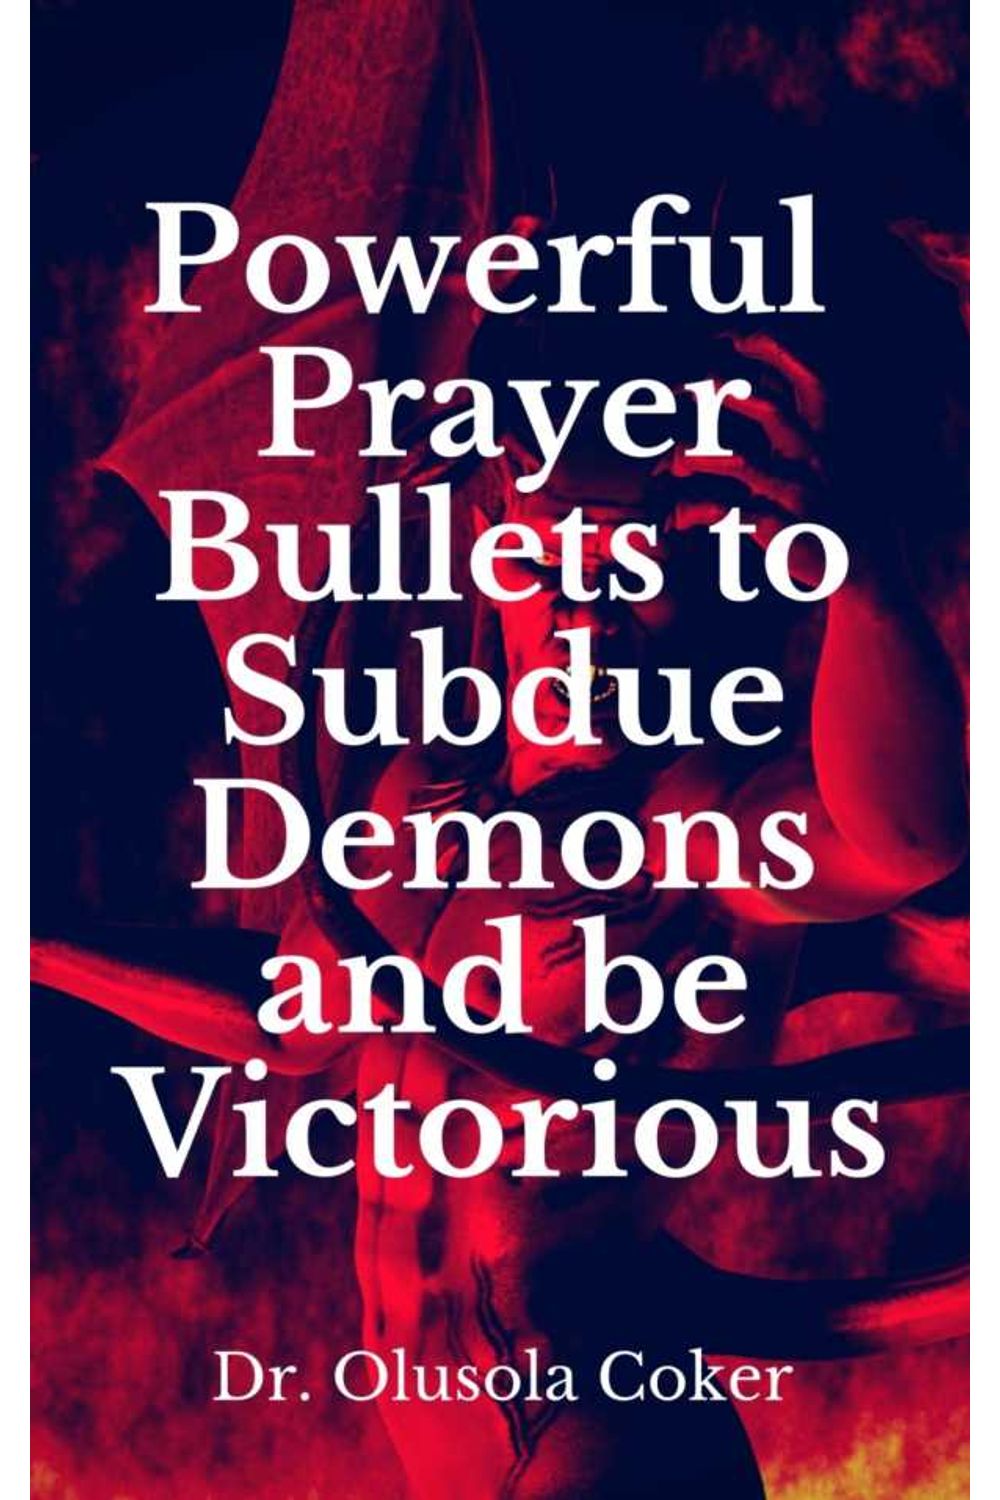 bw-powerful-prayer-bullets-to-subdue-demons-and-be-victorious-bookrix-9783743859944